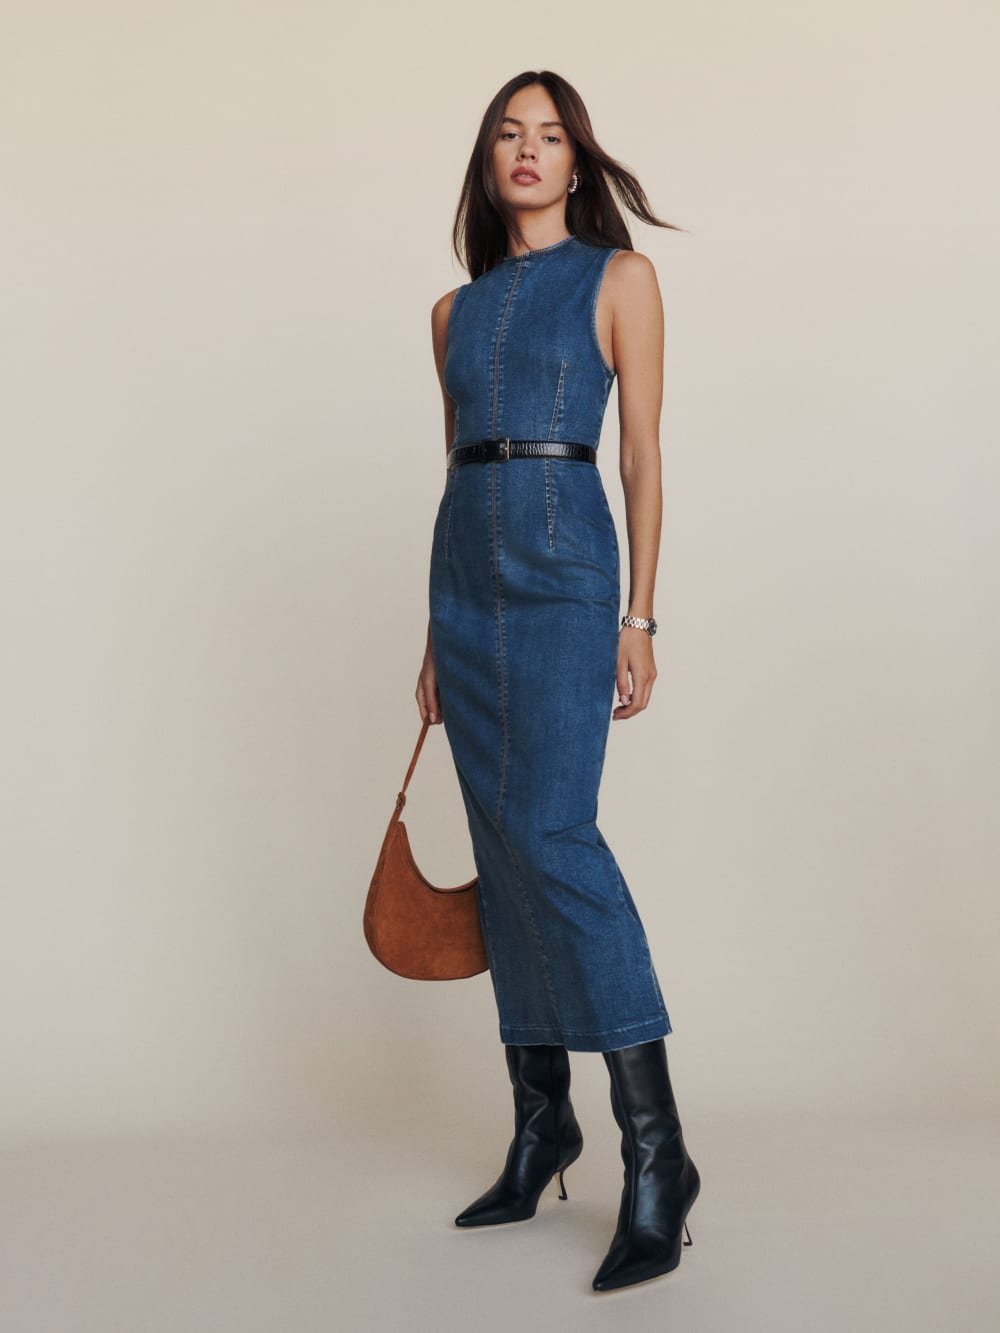 Reformation The Kendi Denim Midi Dress  is a slim fitting midi dress with wide straps, crew neck and back zipper. 